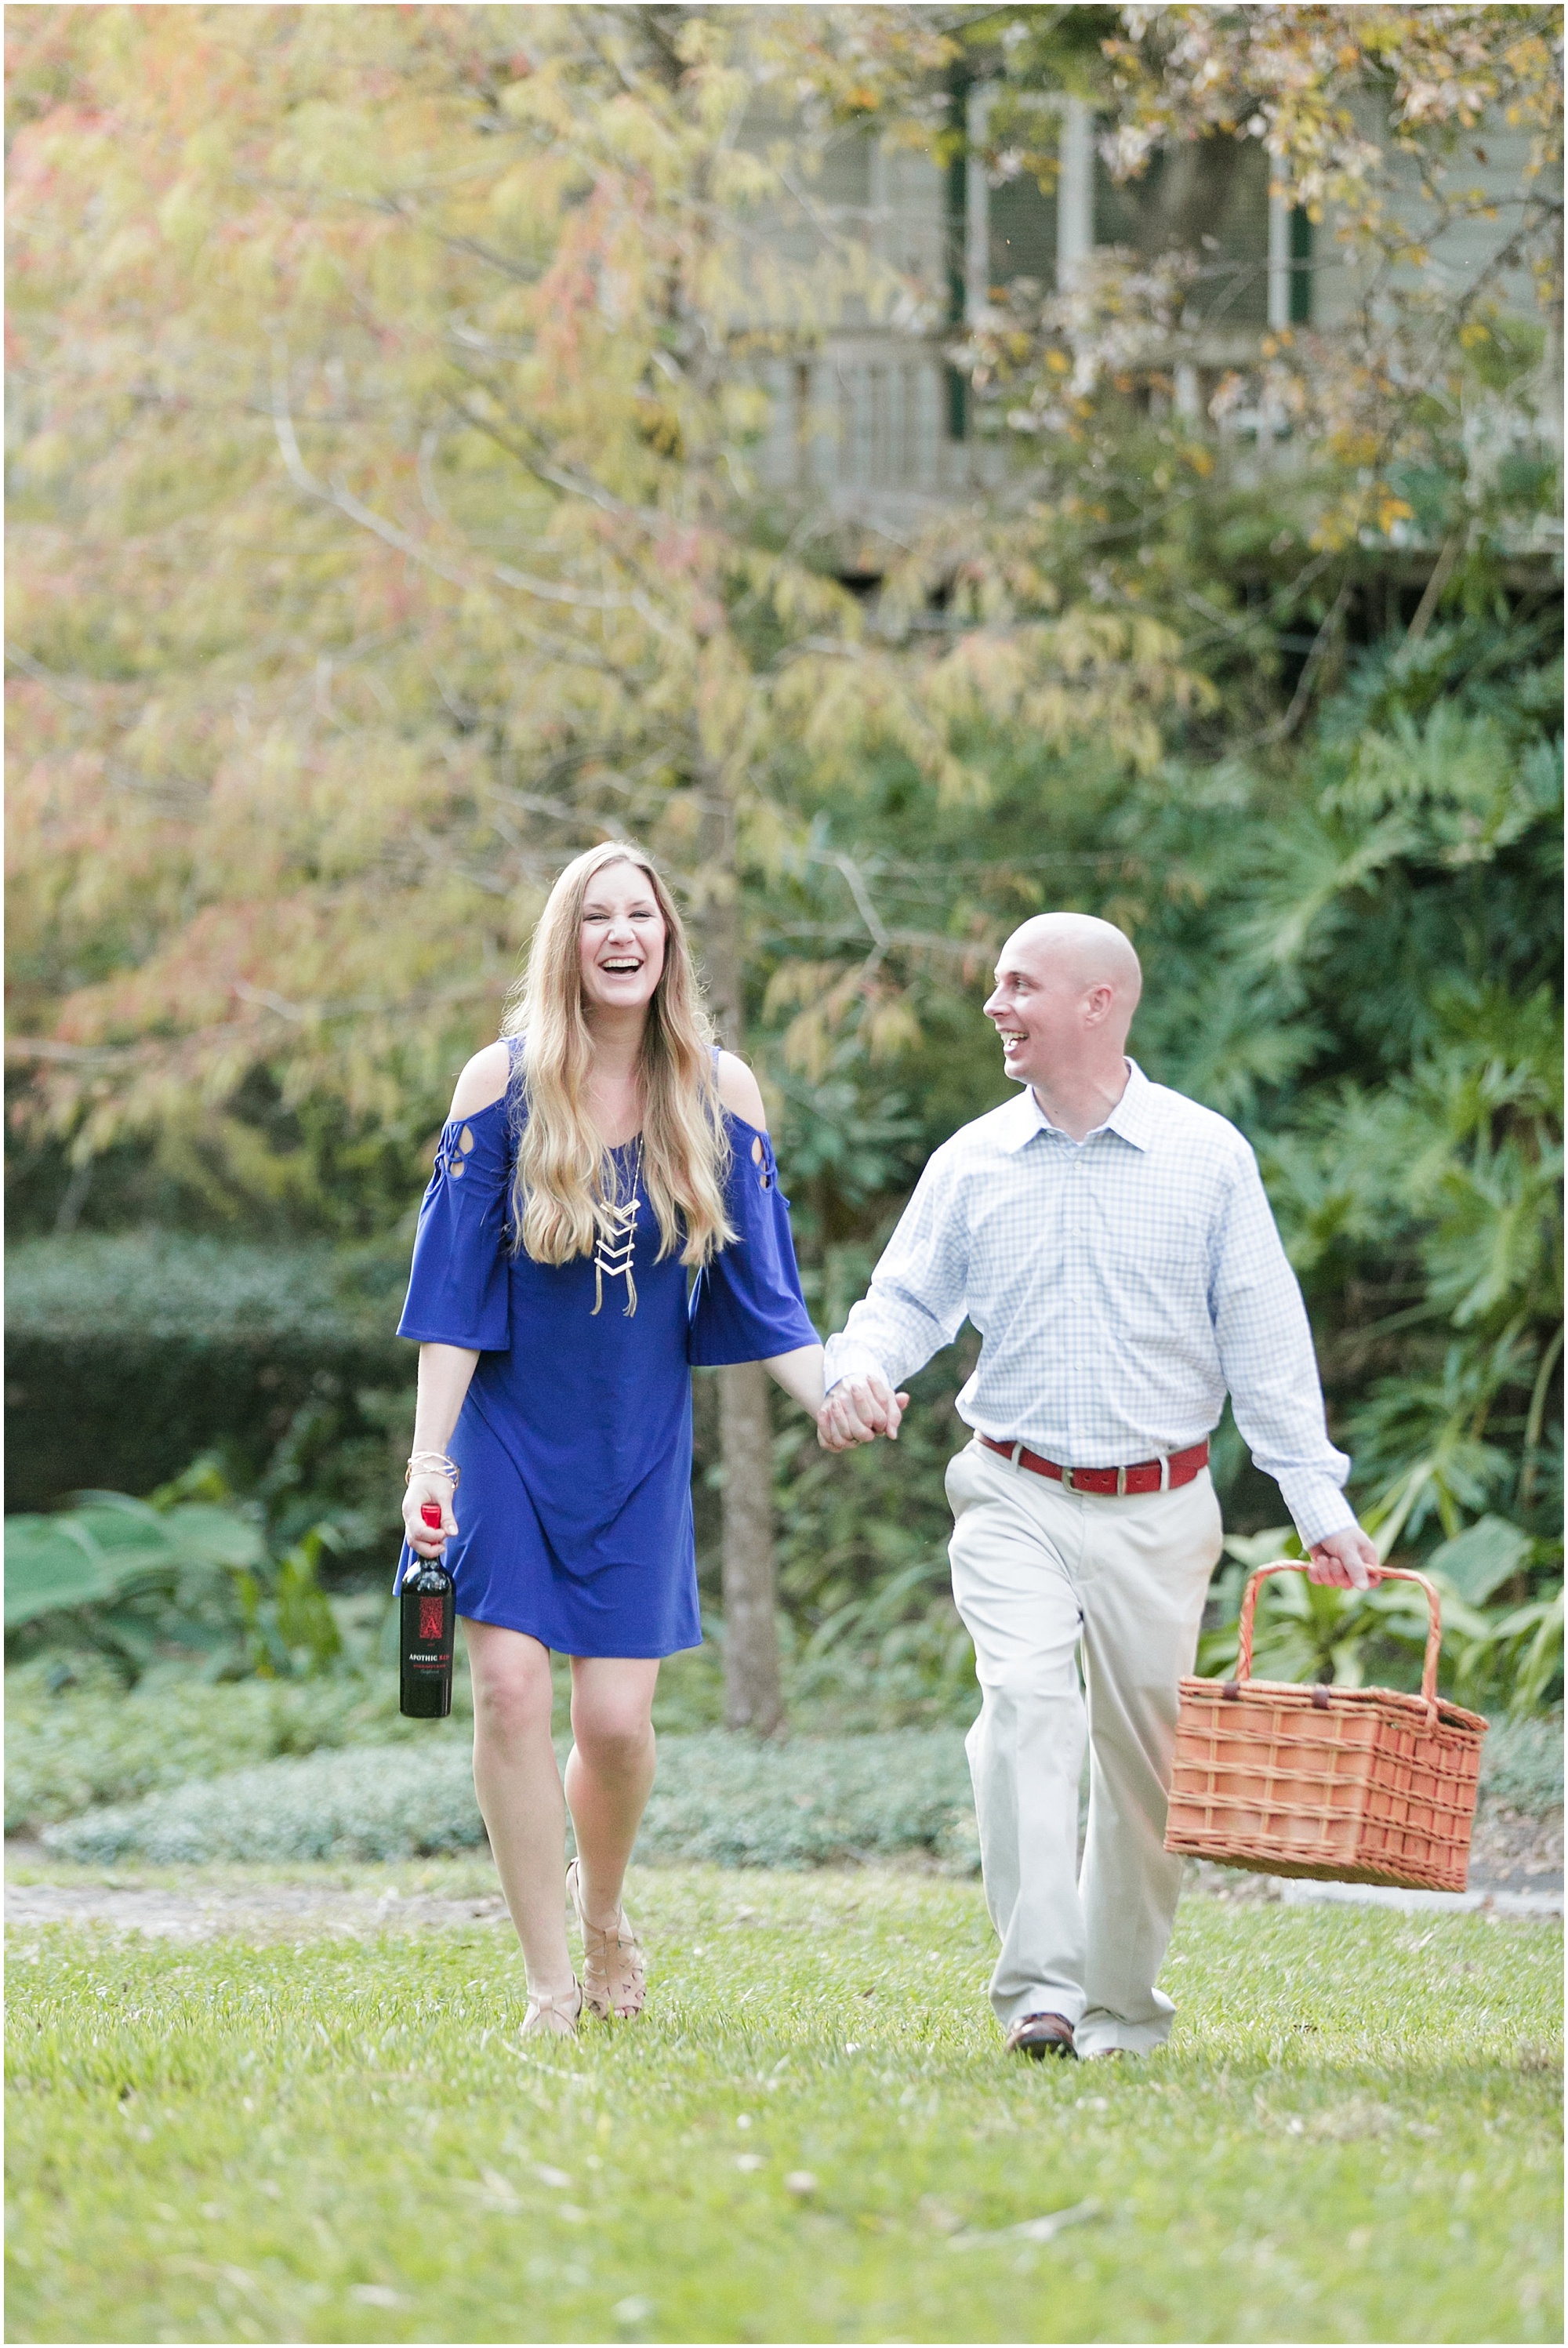 Musical outdoor laughing couple walking while holding a picnic basket and wine.